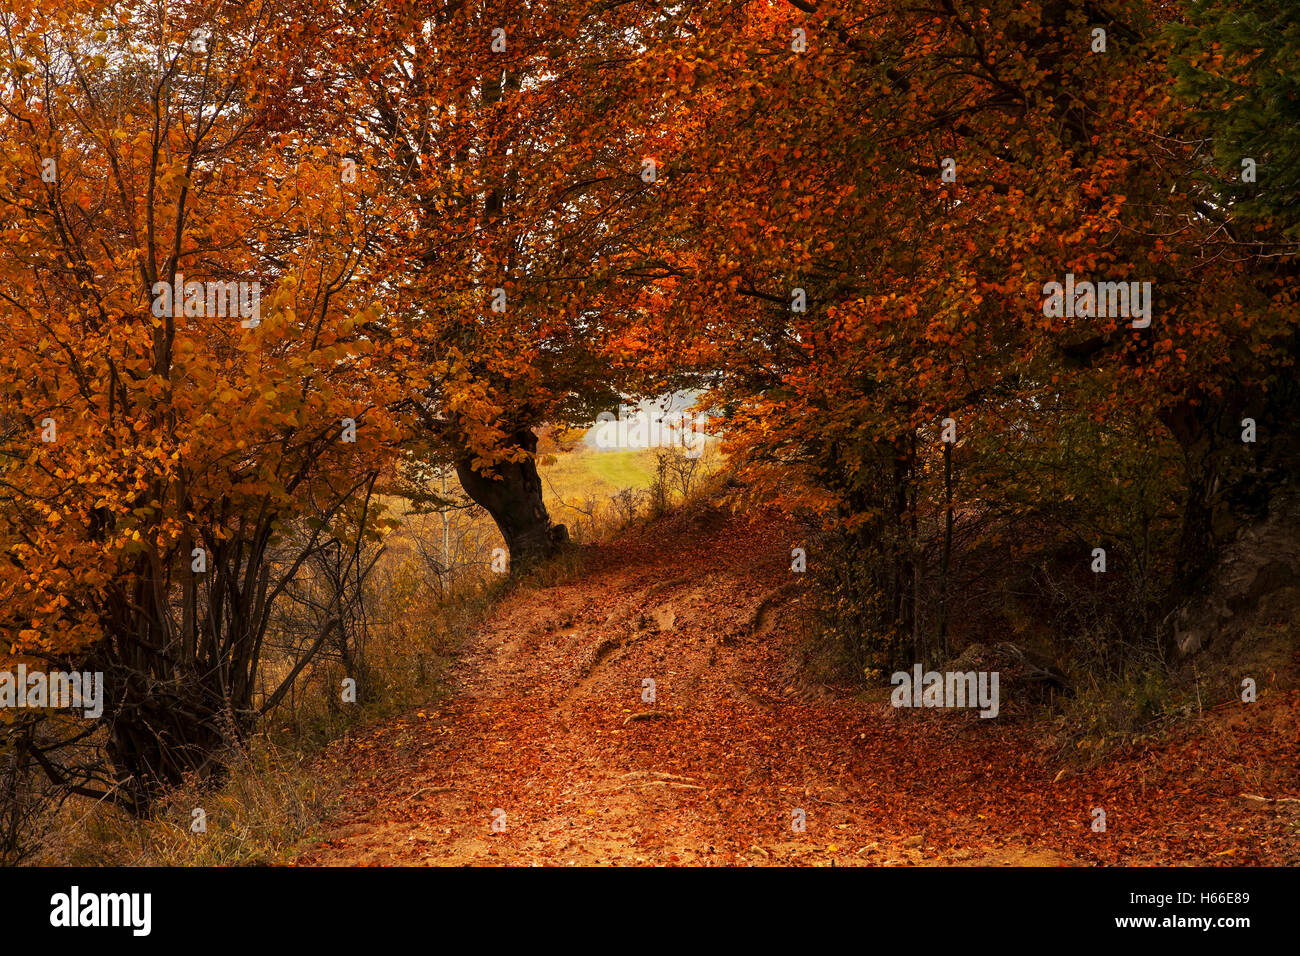 Scenic mysterious road on autumn countryside landscape with beautiful colorful trees Stock Photo